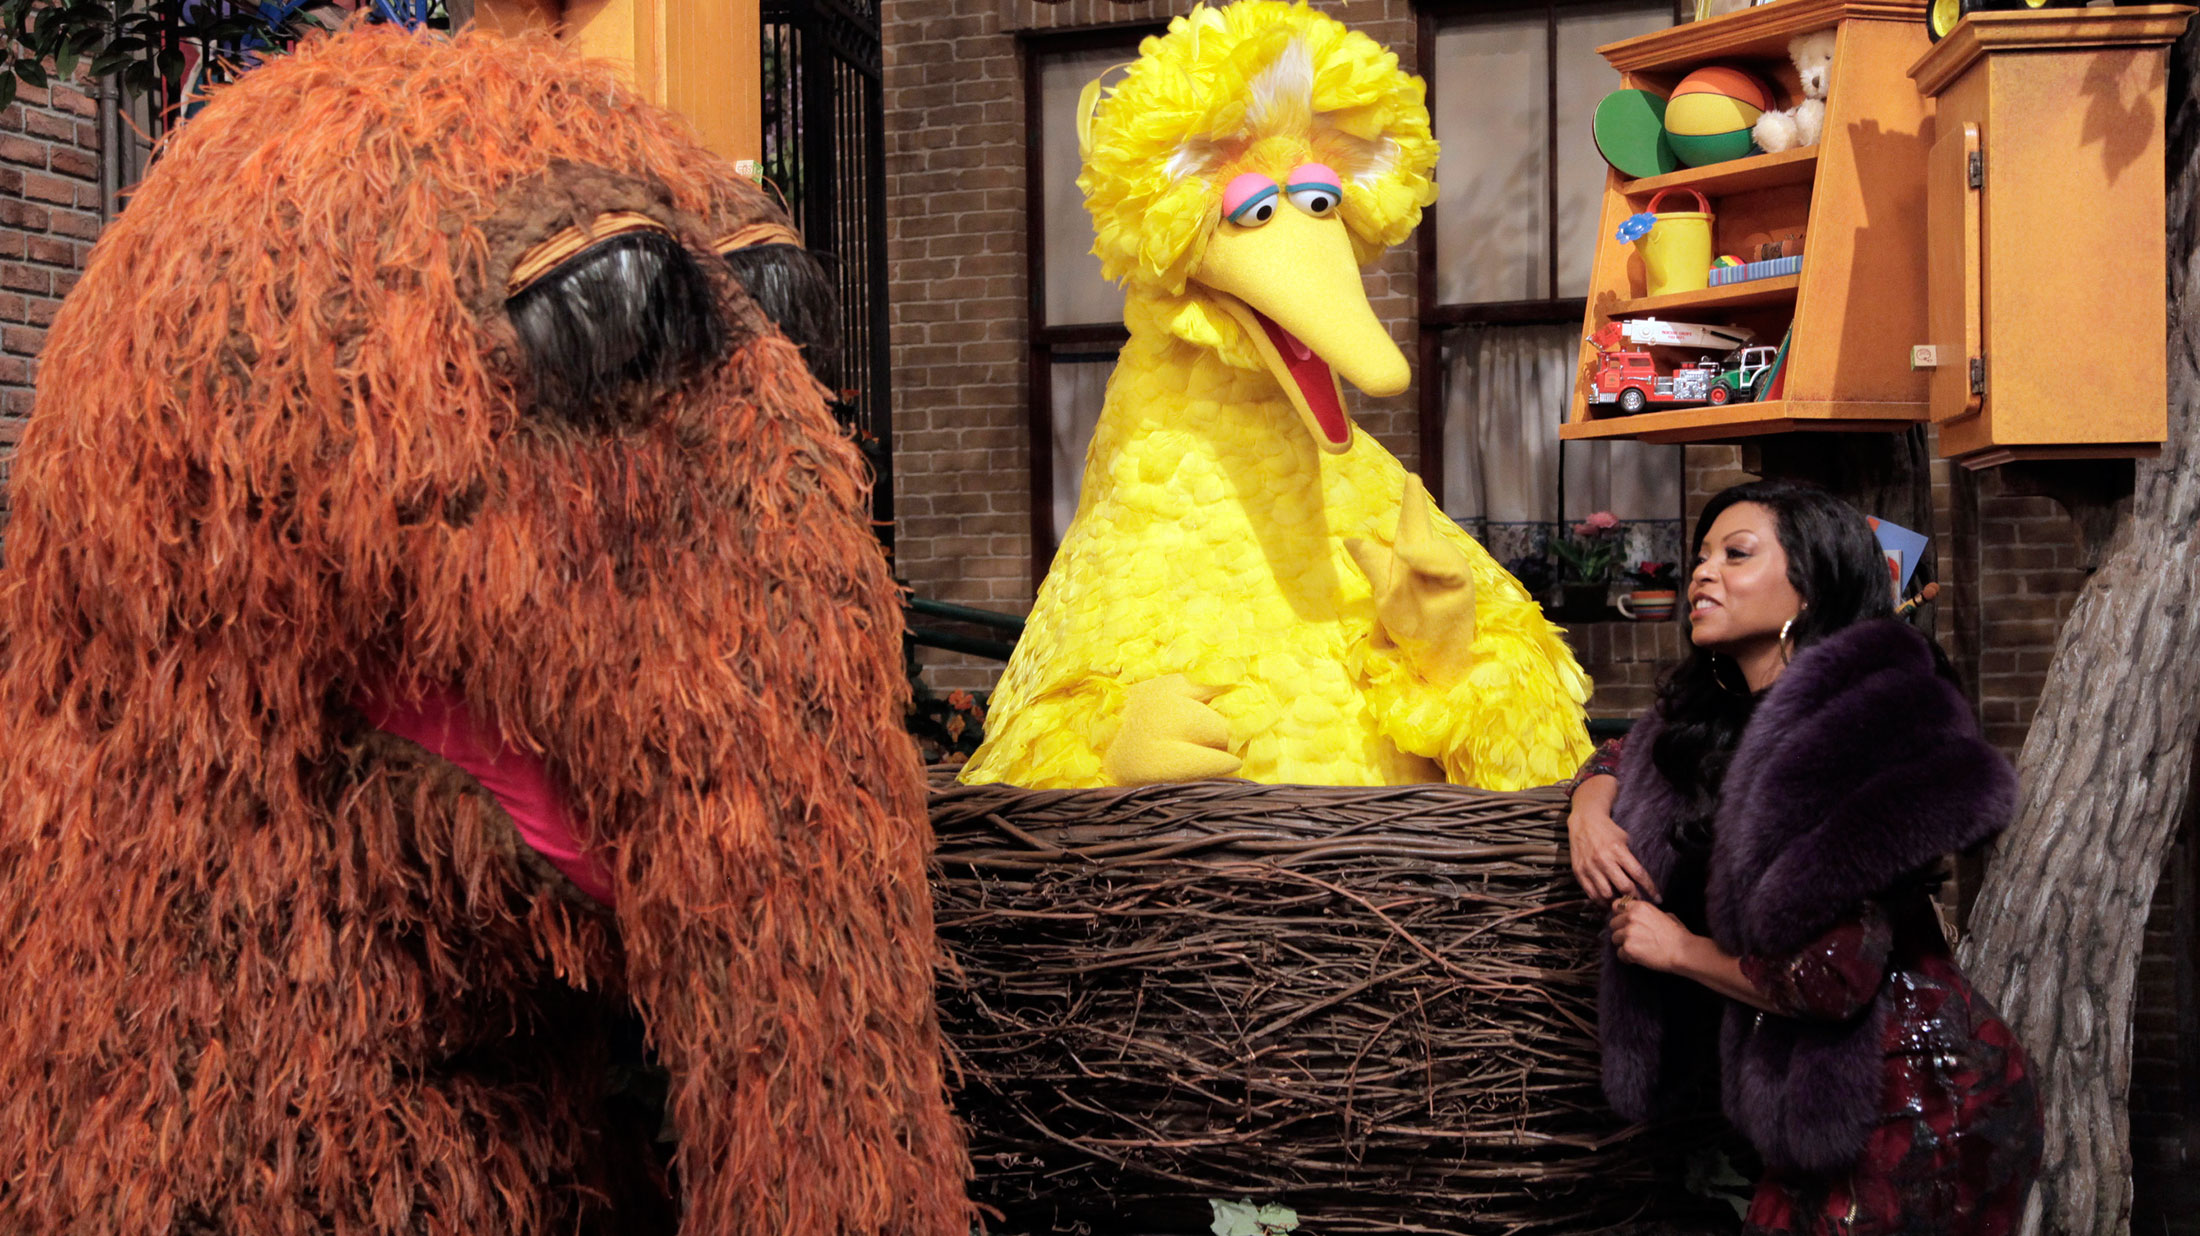 Mr. Snuffleupagus, left, Big Bird and actor Taraji P. Henson during the &quot;Sesame Street Promo&quot; skit on April 11, 2015 on an episode of &quot;Saturday Night Live.&quot;
